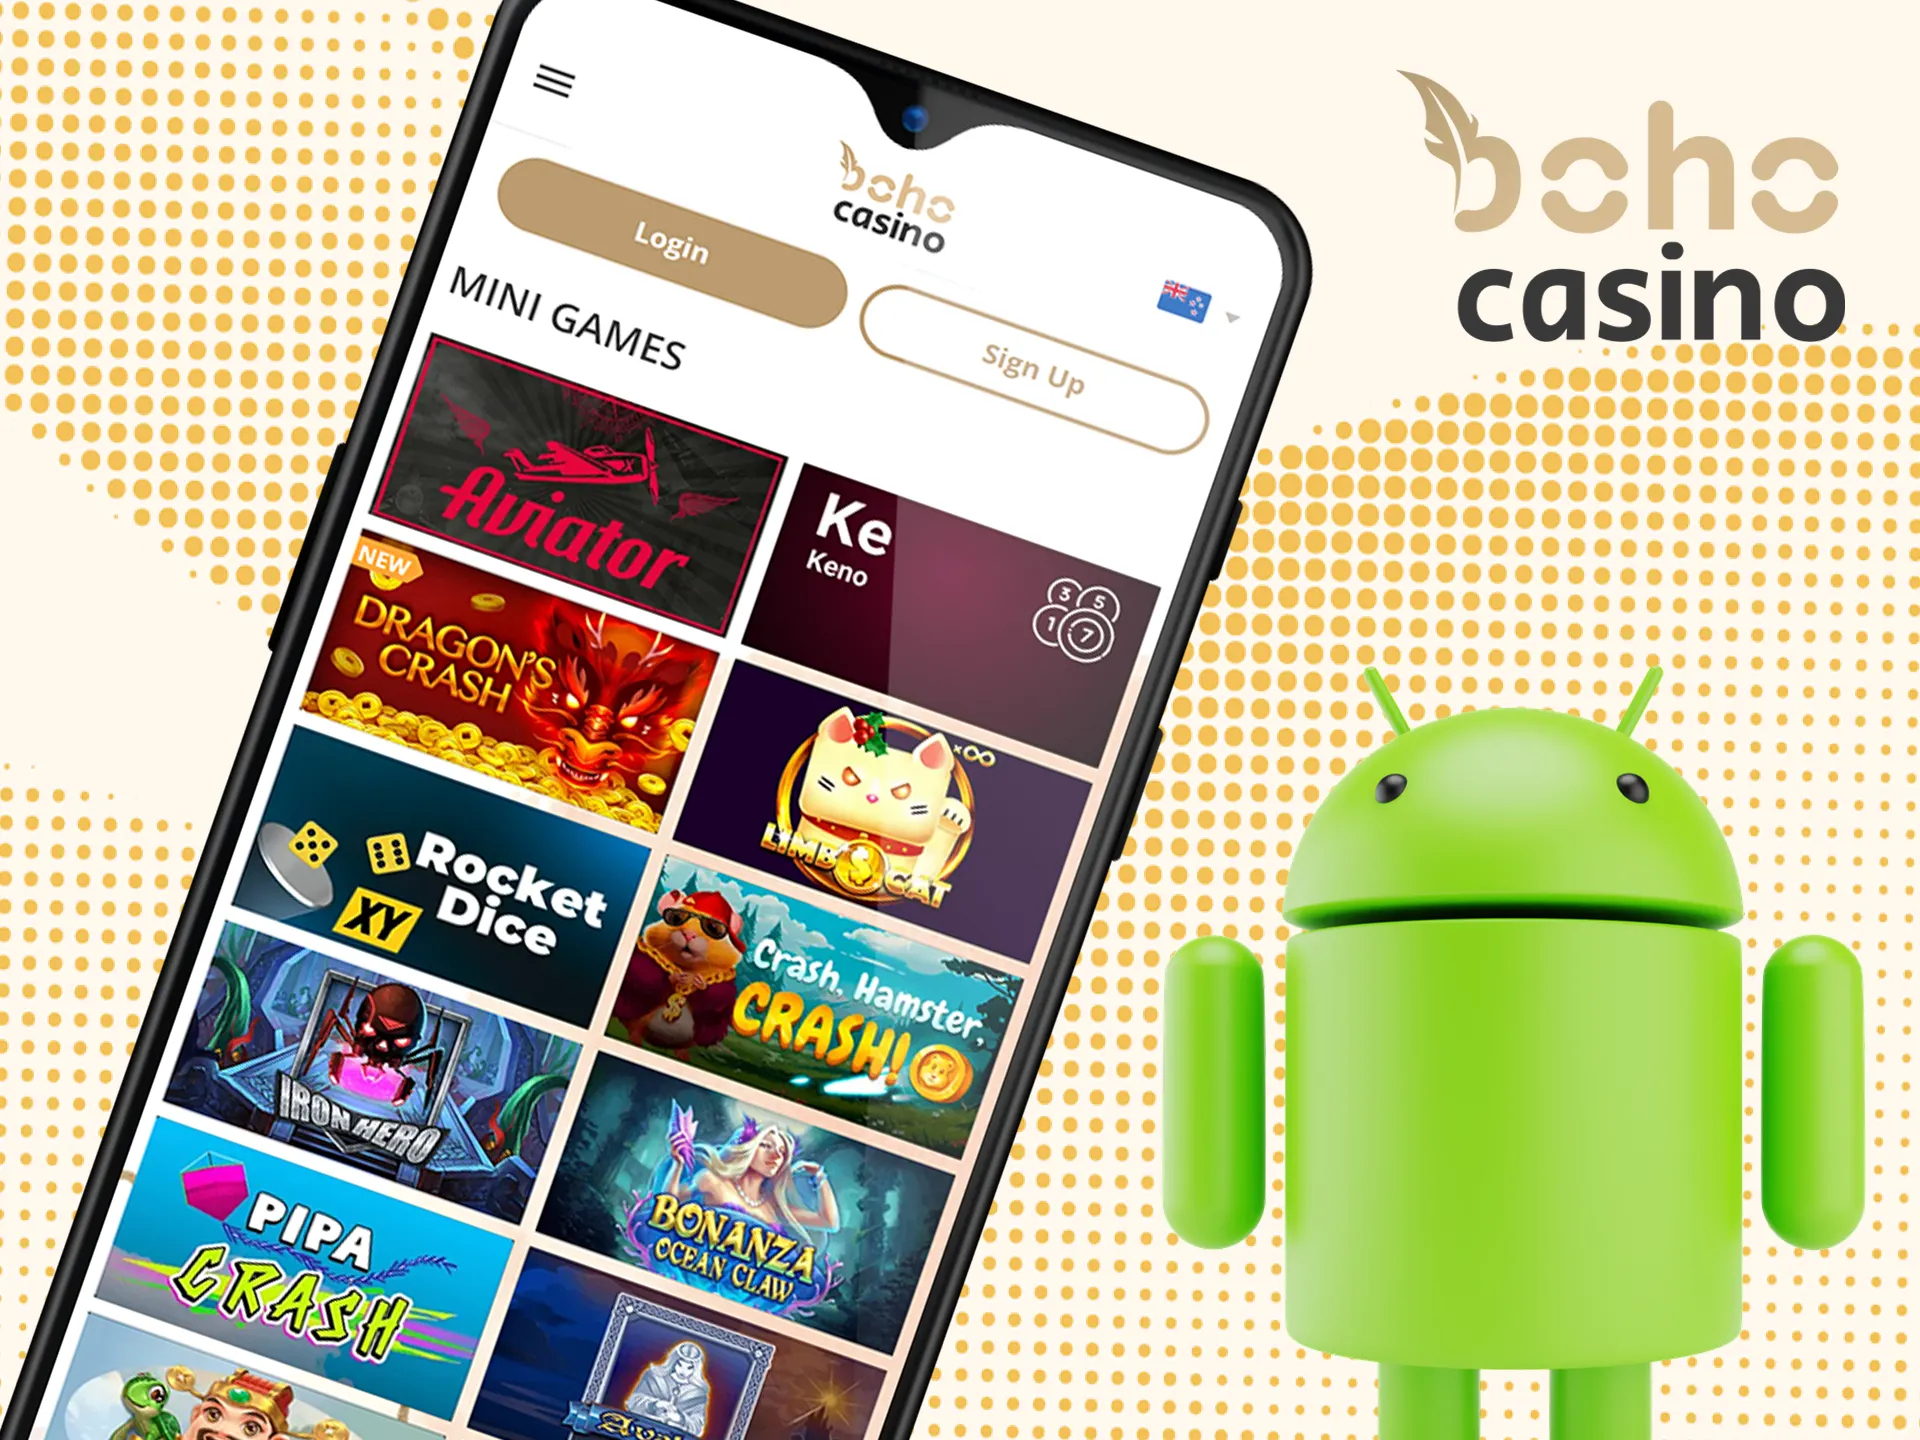 Boho Casino app is compatible with all Android devices.